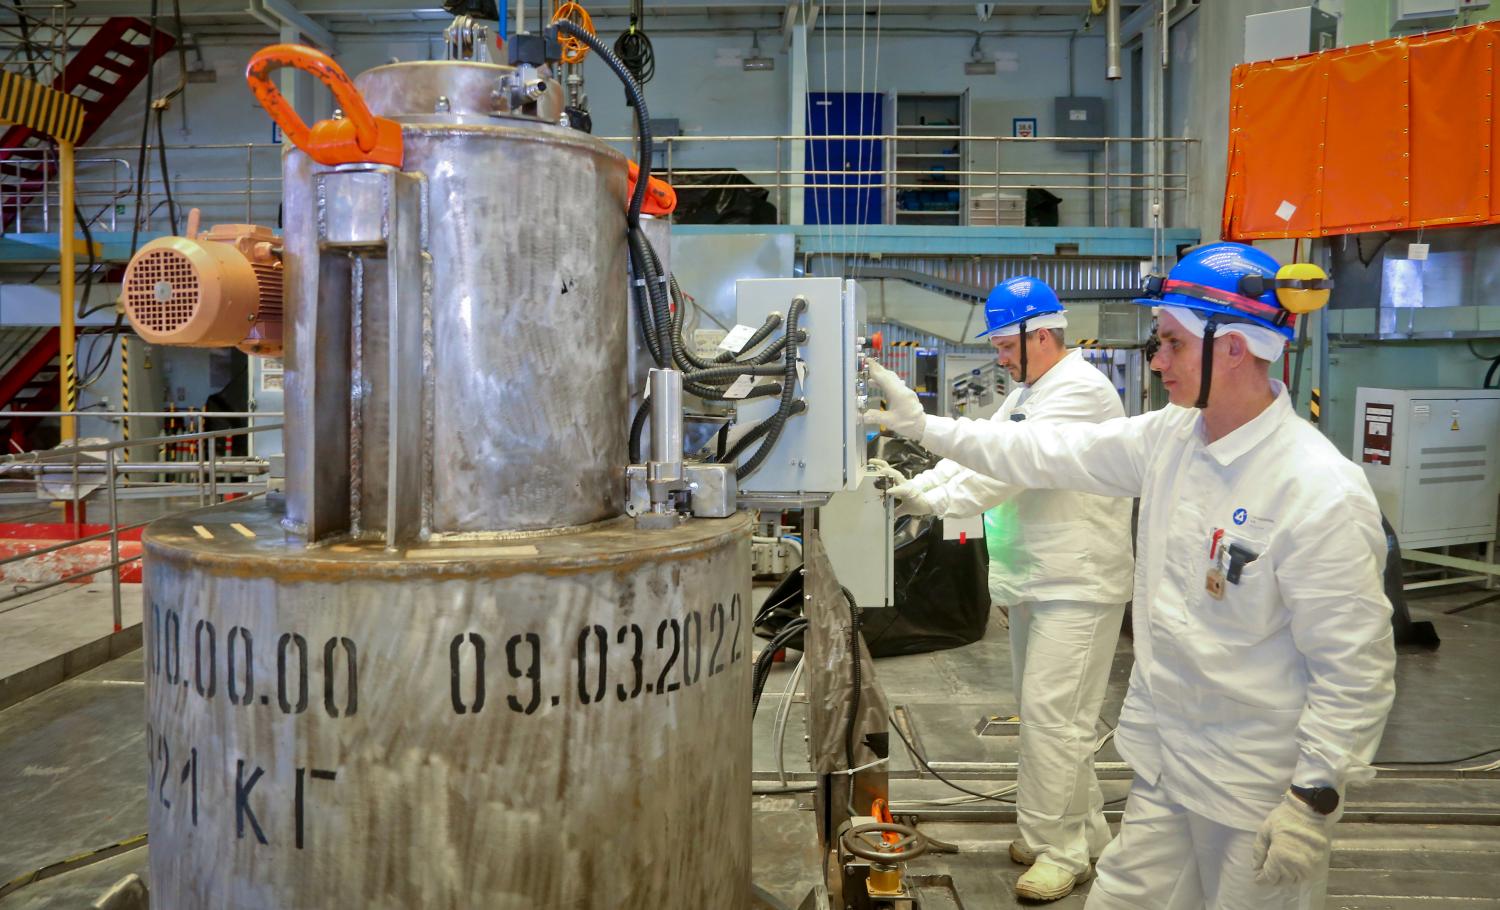 The Smolensk NPP sent the first batch of valuable cobalt-60 isotope